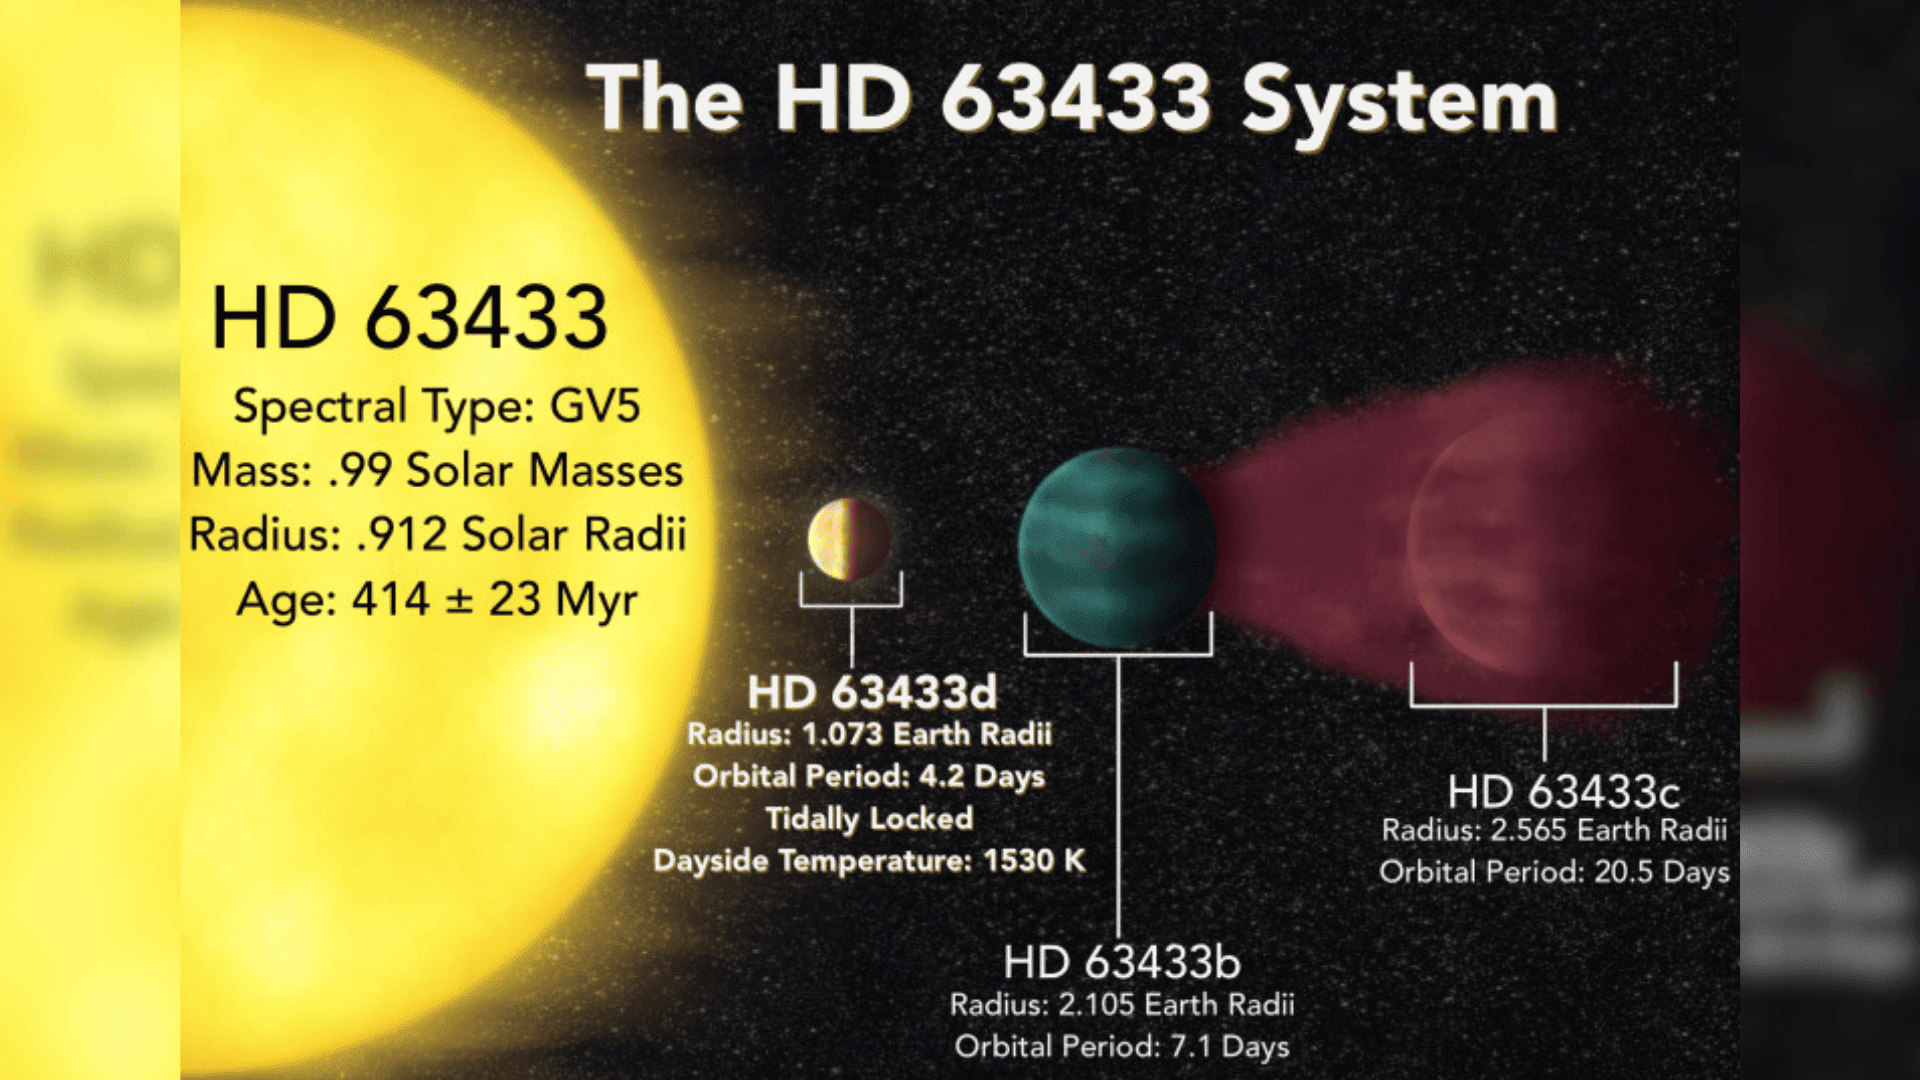 Earth-sized planet HD 63433d sits close to its star in the constellation Ursa Major